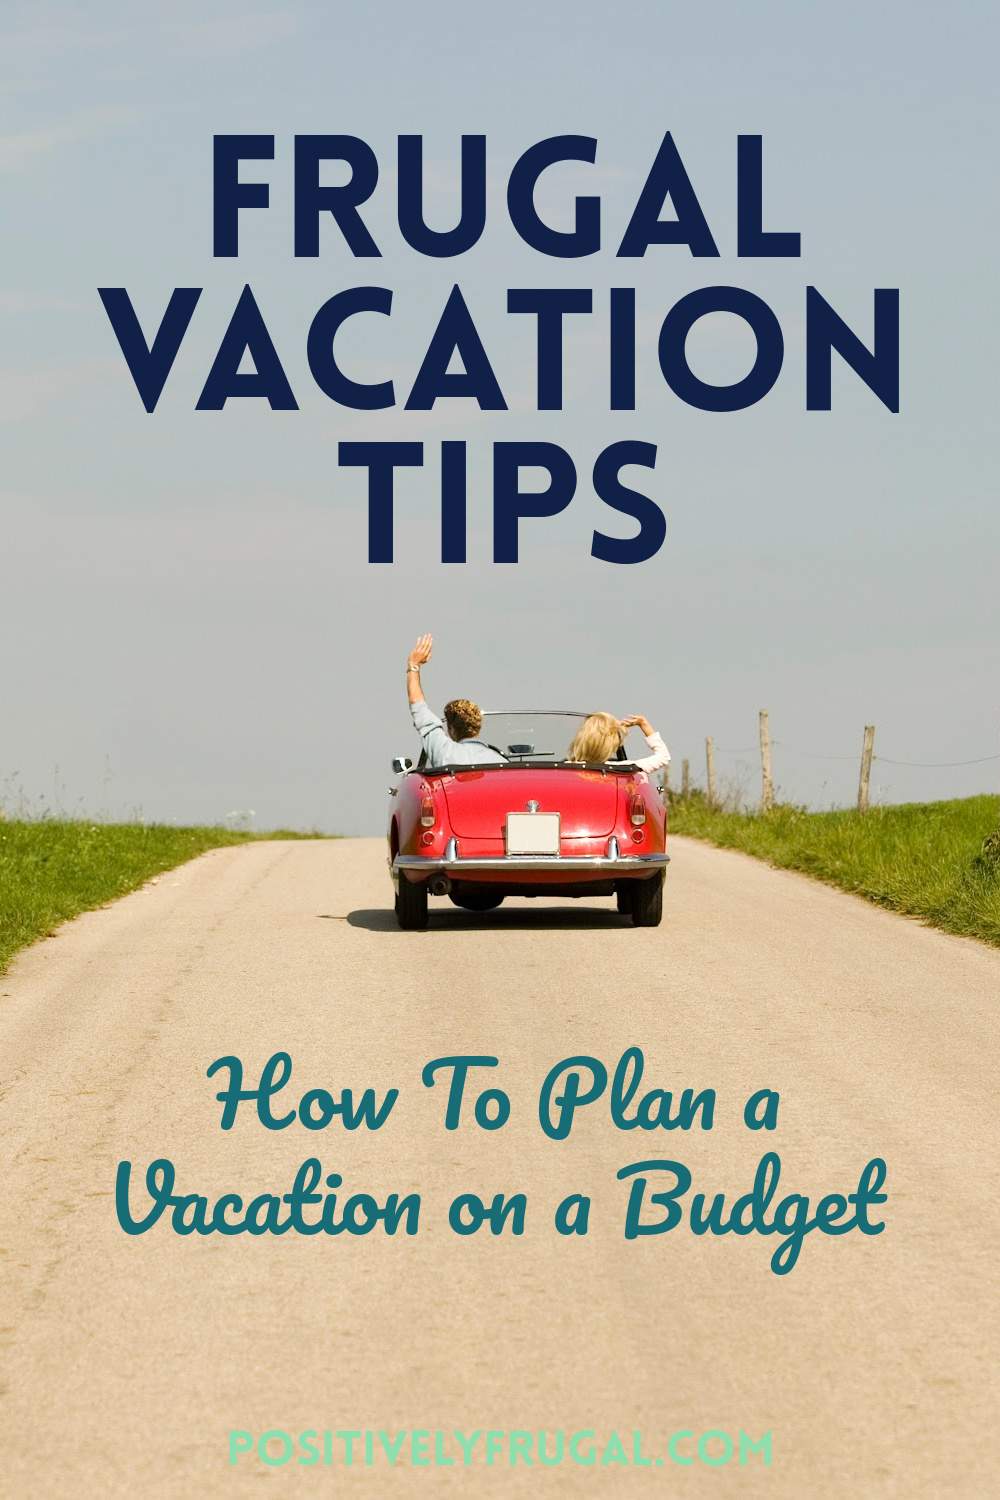 Frugal Vacation Tips Plan a Vacation on a Budget by PositivelyFrugal.com